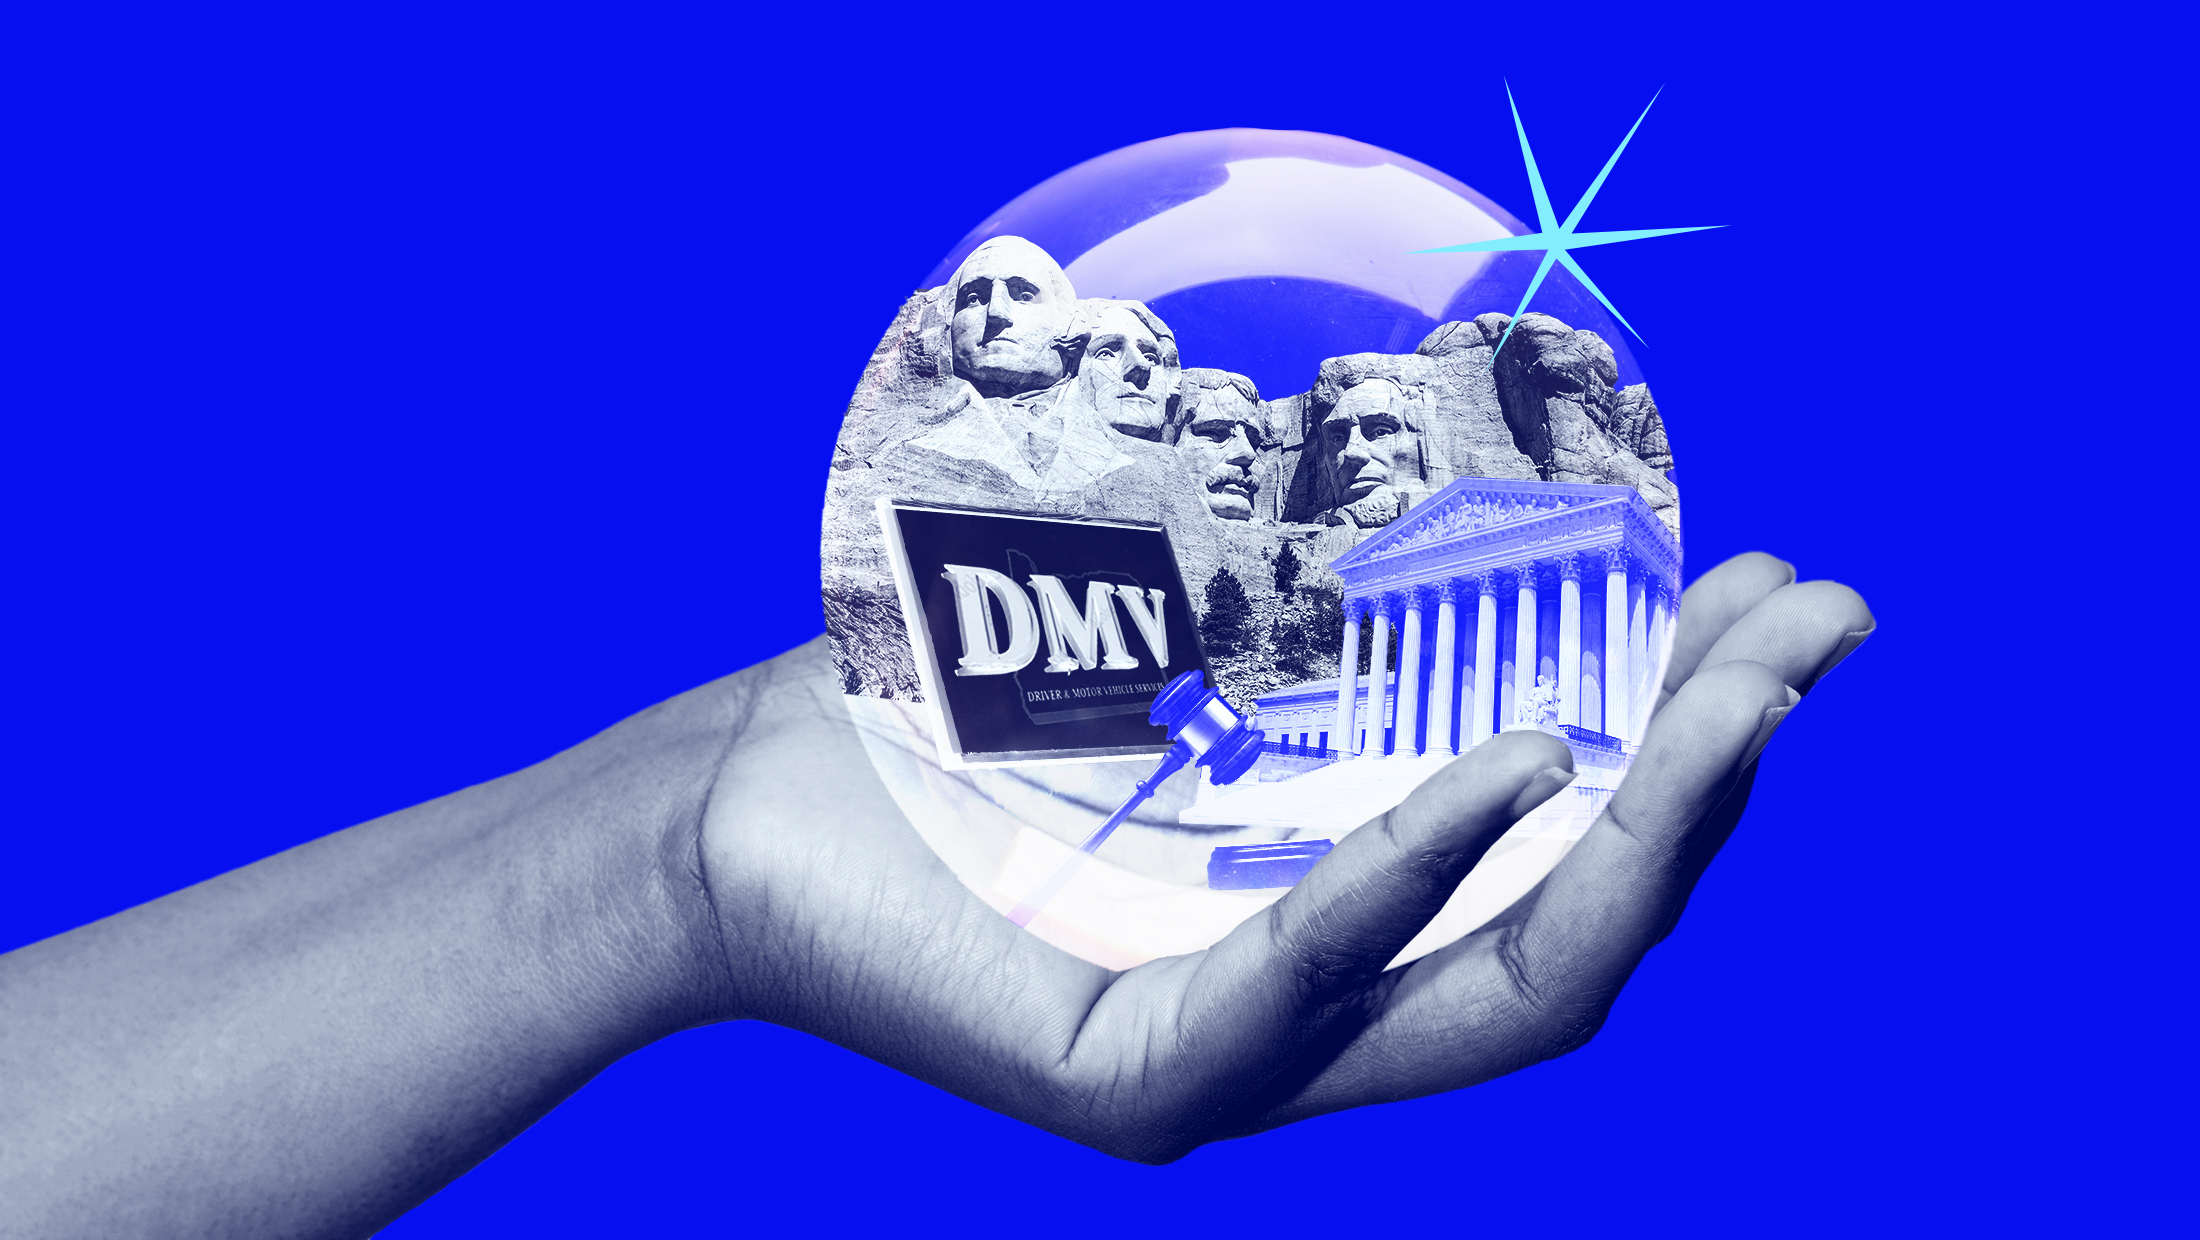 A bright blue background with a hand holding a crystal ball revealing a DMV sign, Mount Rushmore, a gavel and the U.S. Supreme Court building